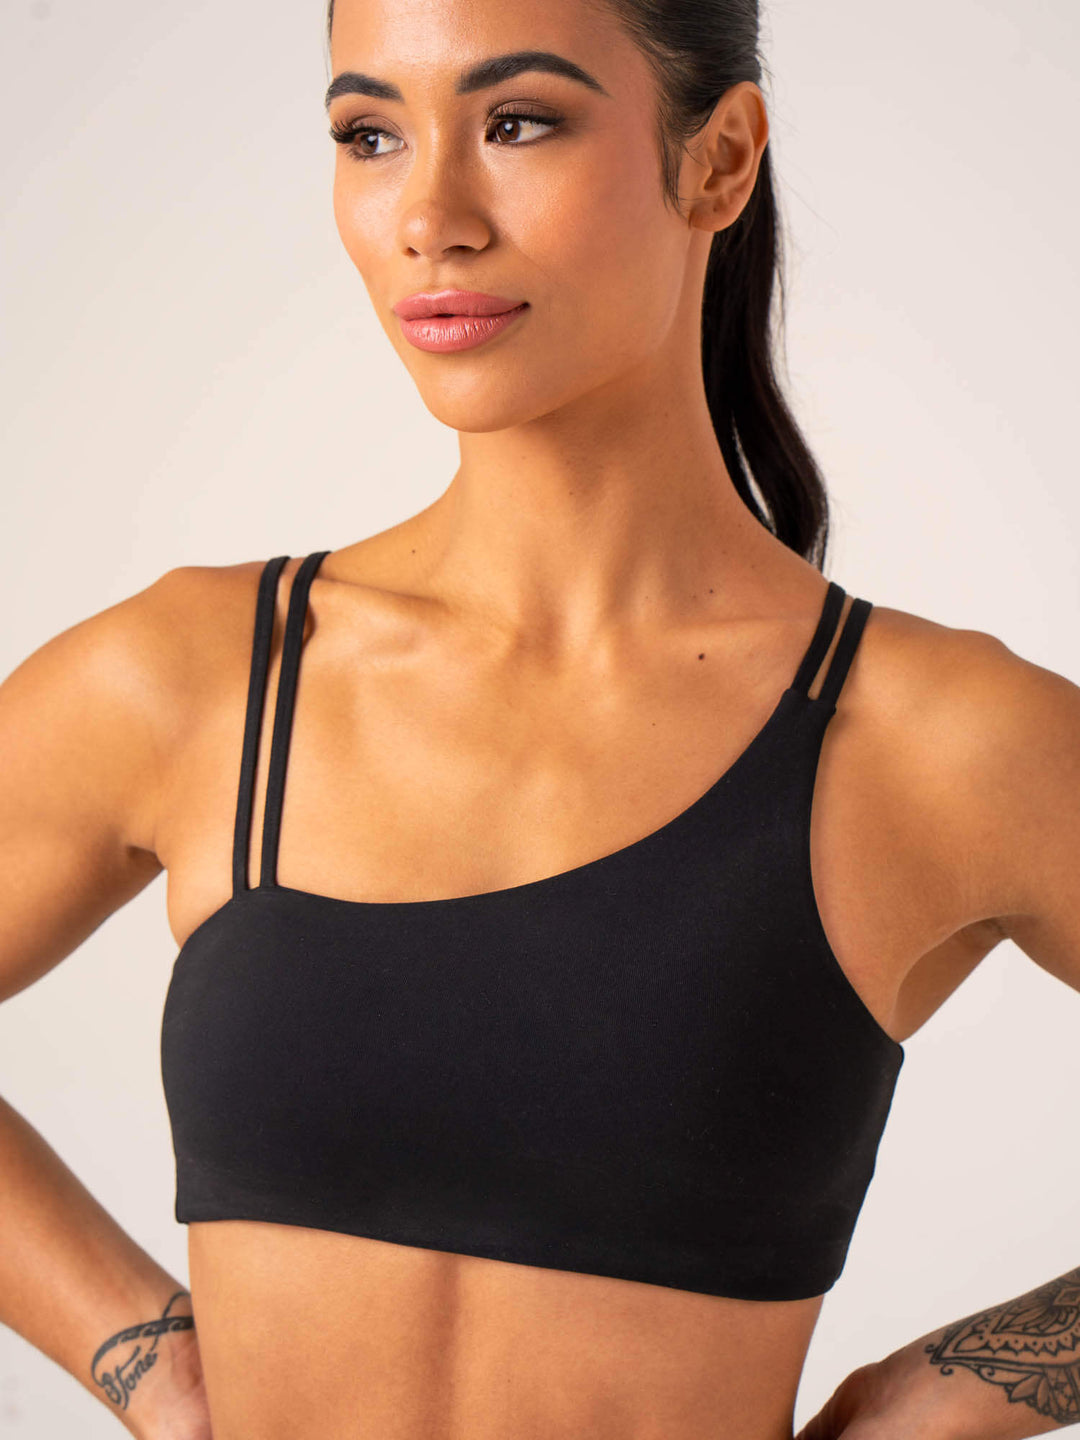 CHAMPION Black The Absolute Workout Unlined Sports Bra, US Small, NWOT 